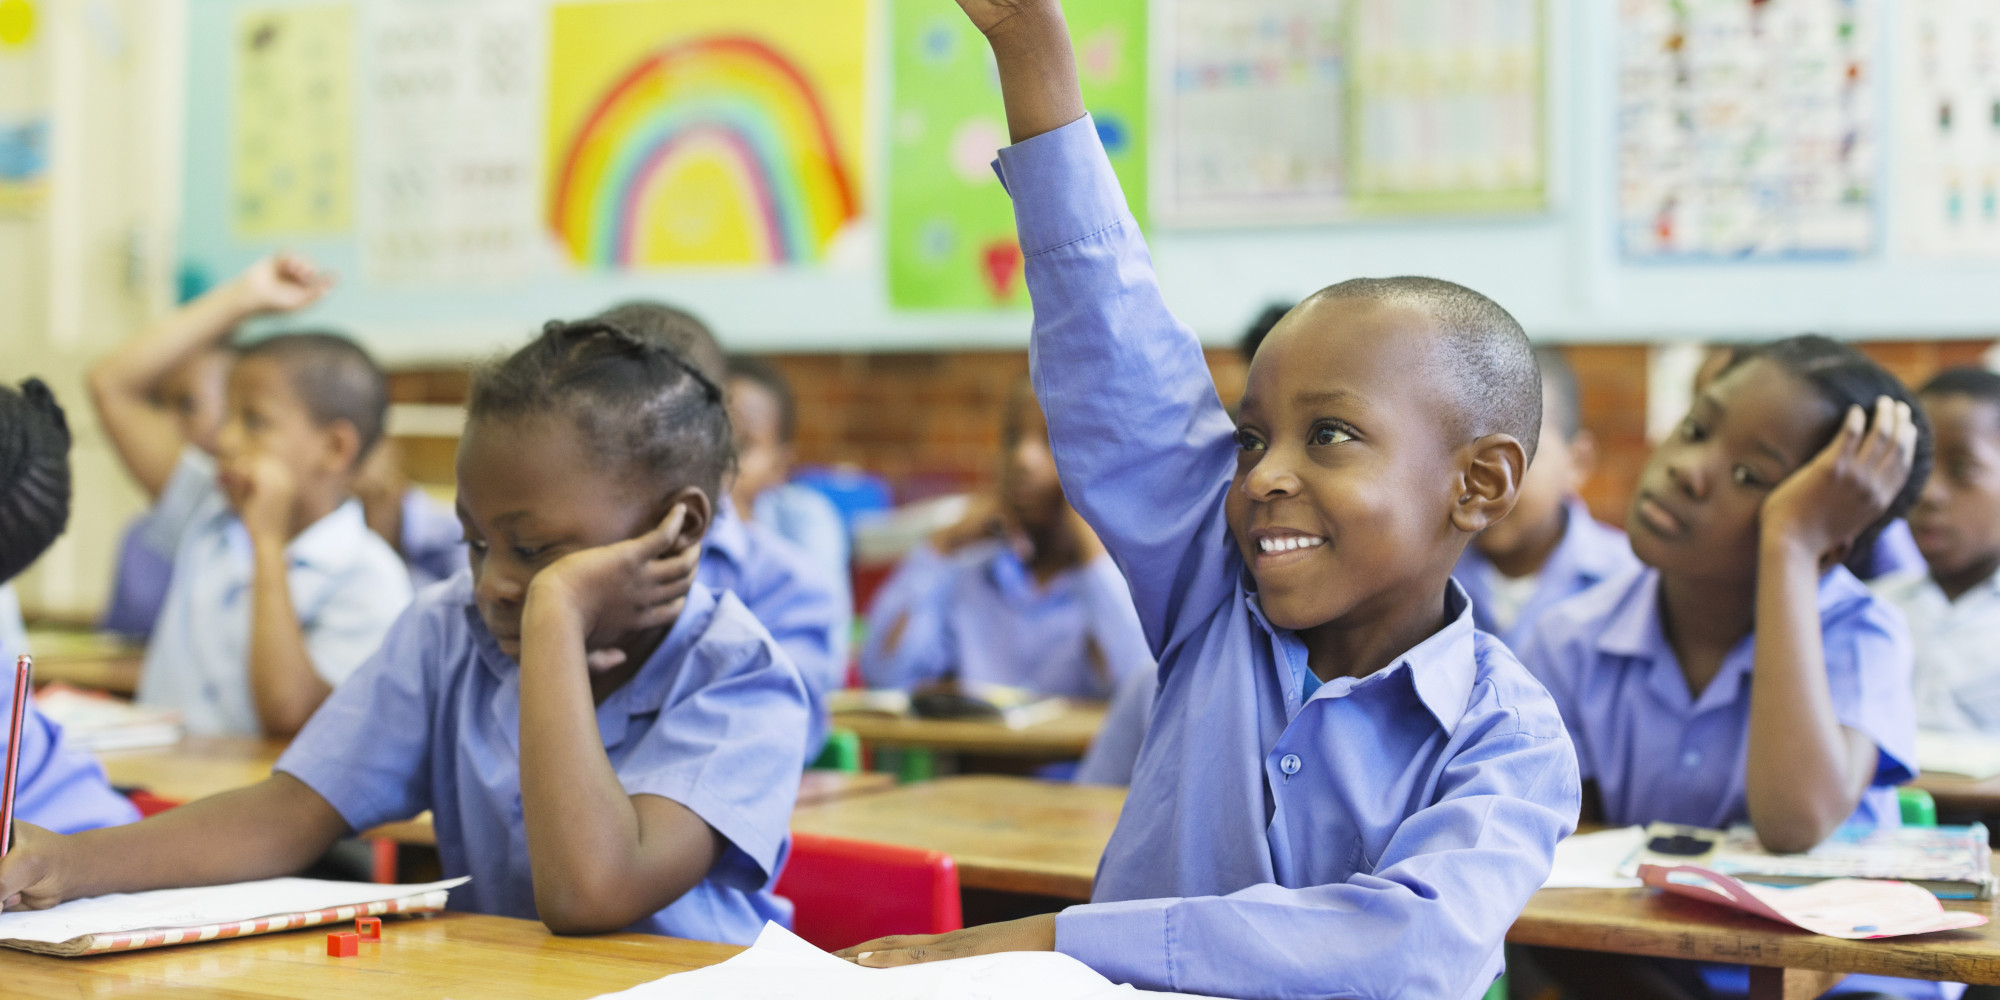 Keeping Children Healthy, In School and Learning | HuffPost